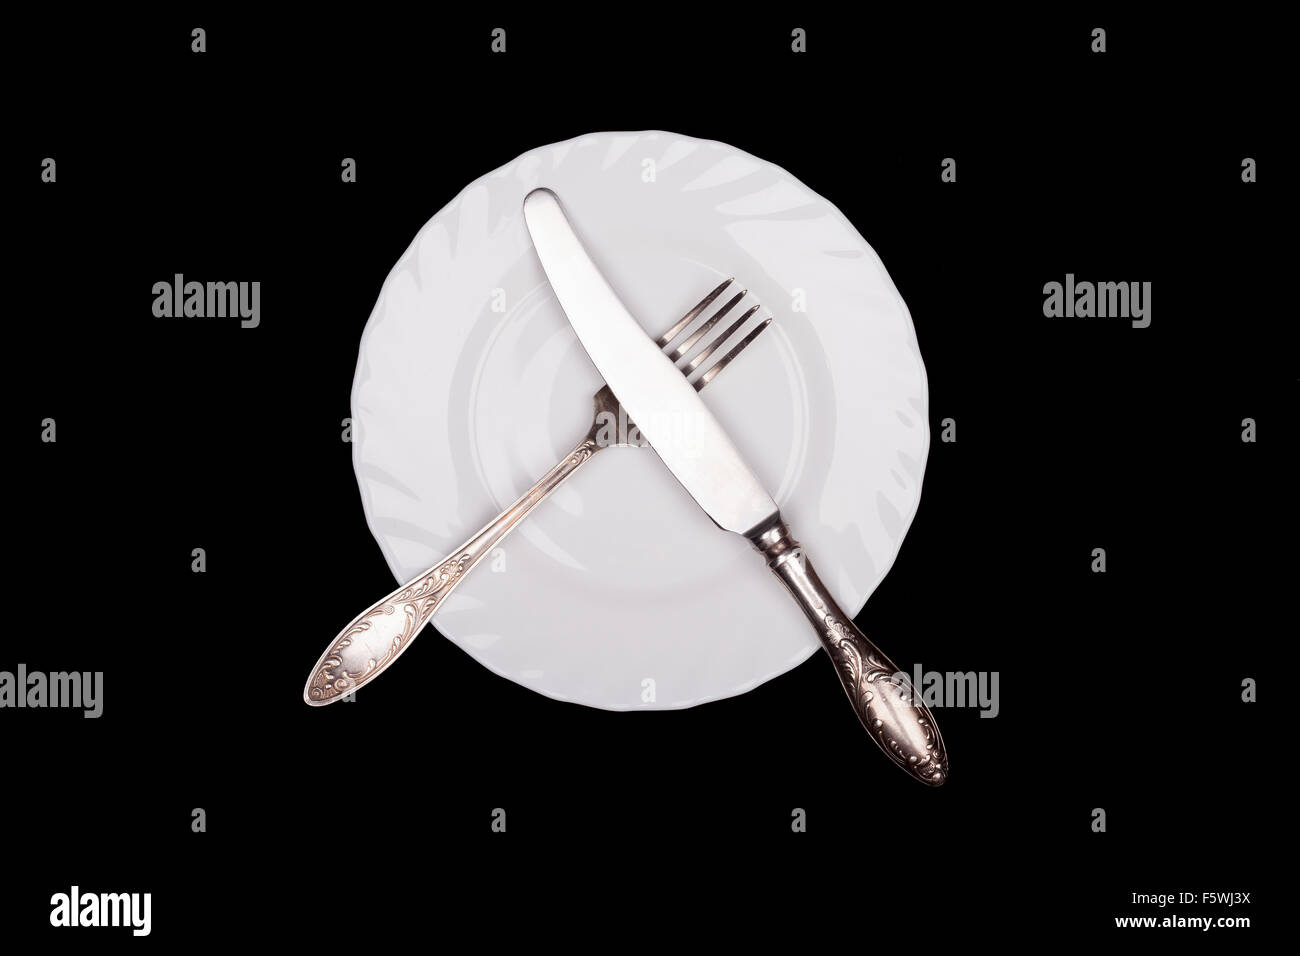 Etiquette sign. Plate, fork, knife top view isolated on black Stock Photo